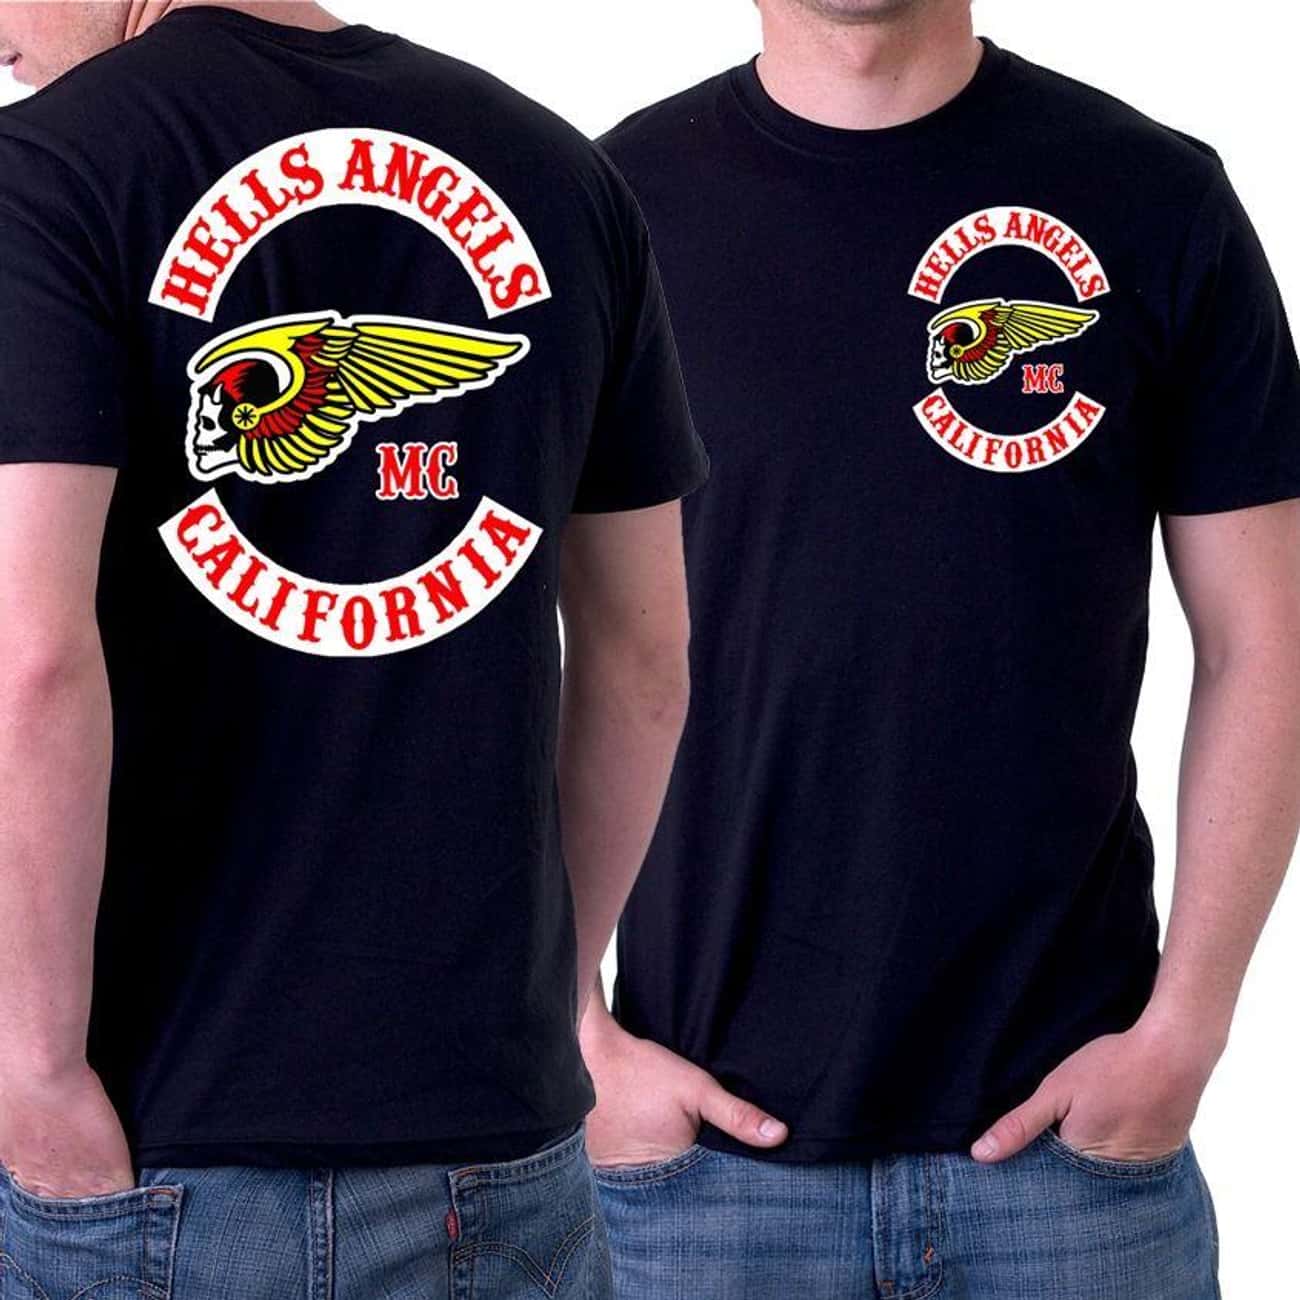 Anyone Can Purchase Outlaw Biker Merchandise